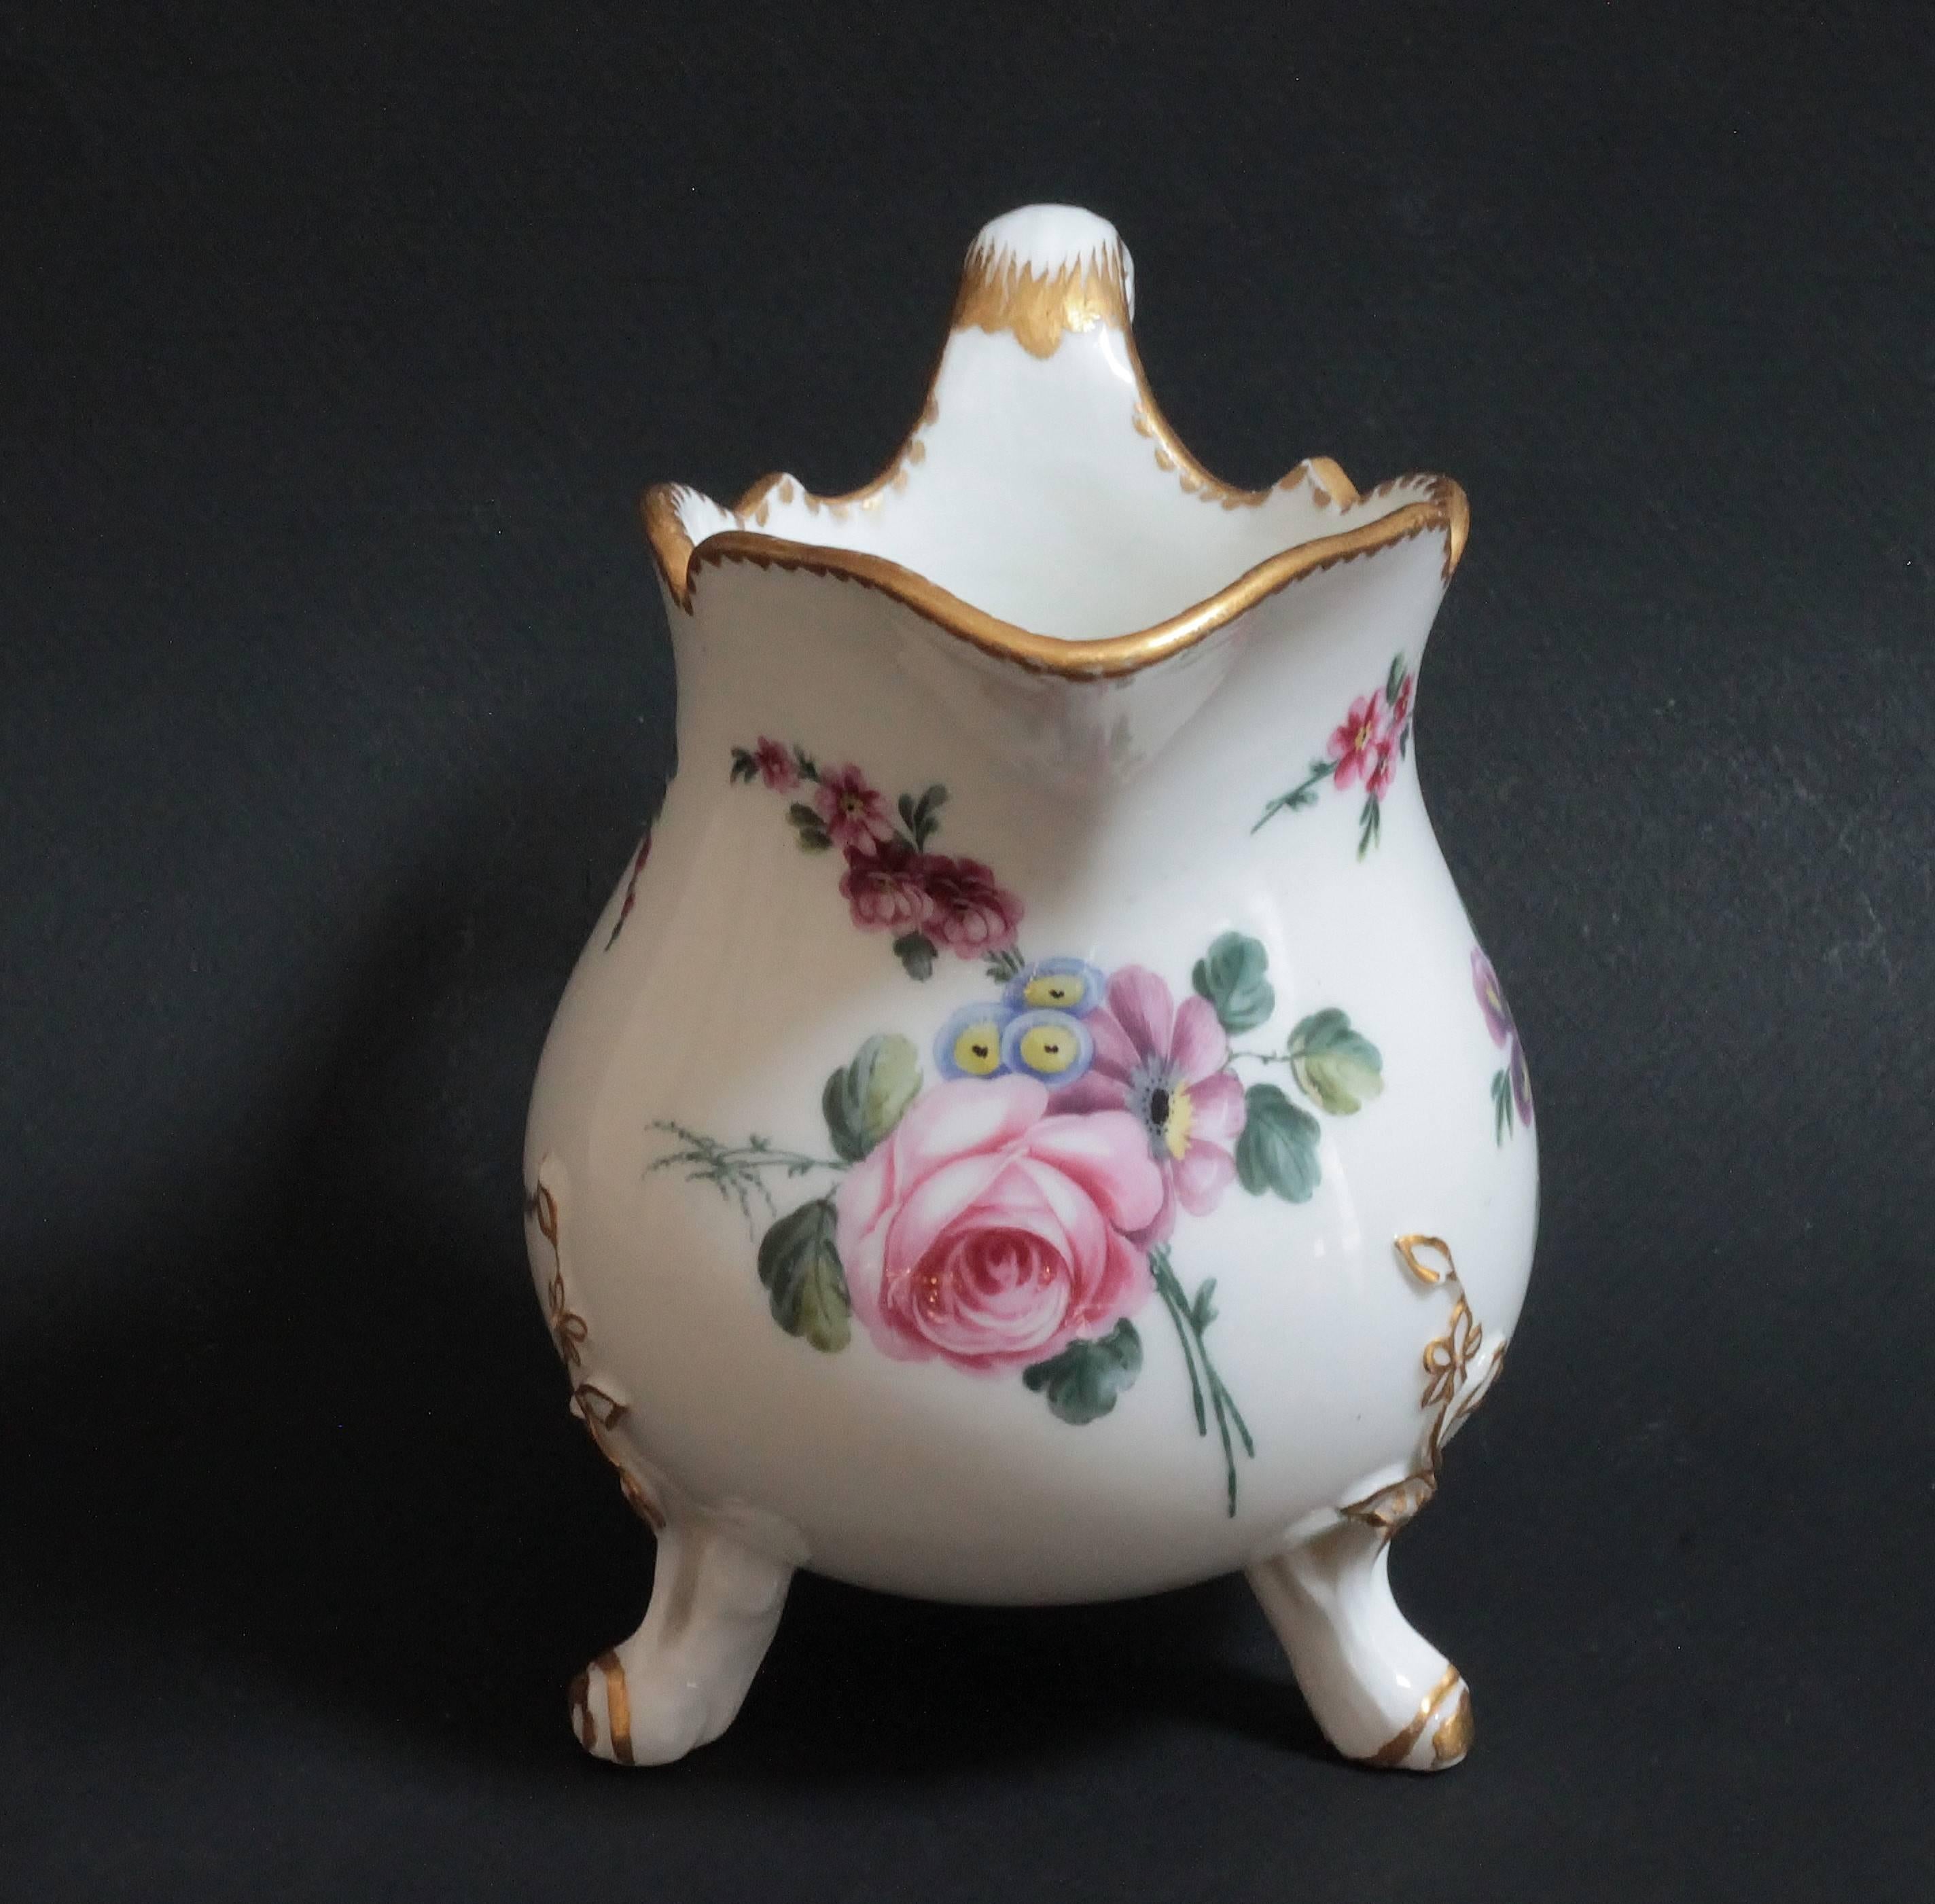 A Sevres porcelain milk jug painted with loose floral bouquet, three gold branches on feet and around handle. Marked in blue under the milk jug with interlaced LL monogram and o for 1767 date-letter, and a sun for the painter De Ville or N-L Petit.